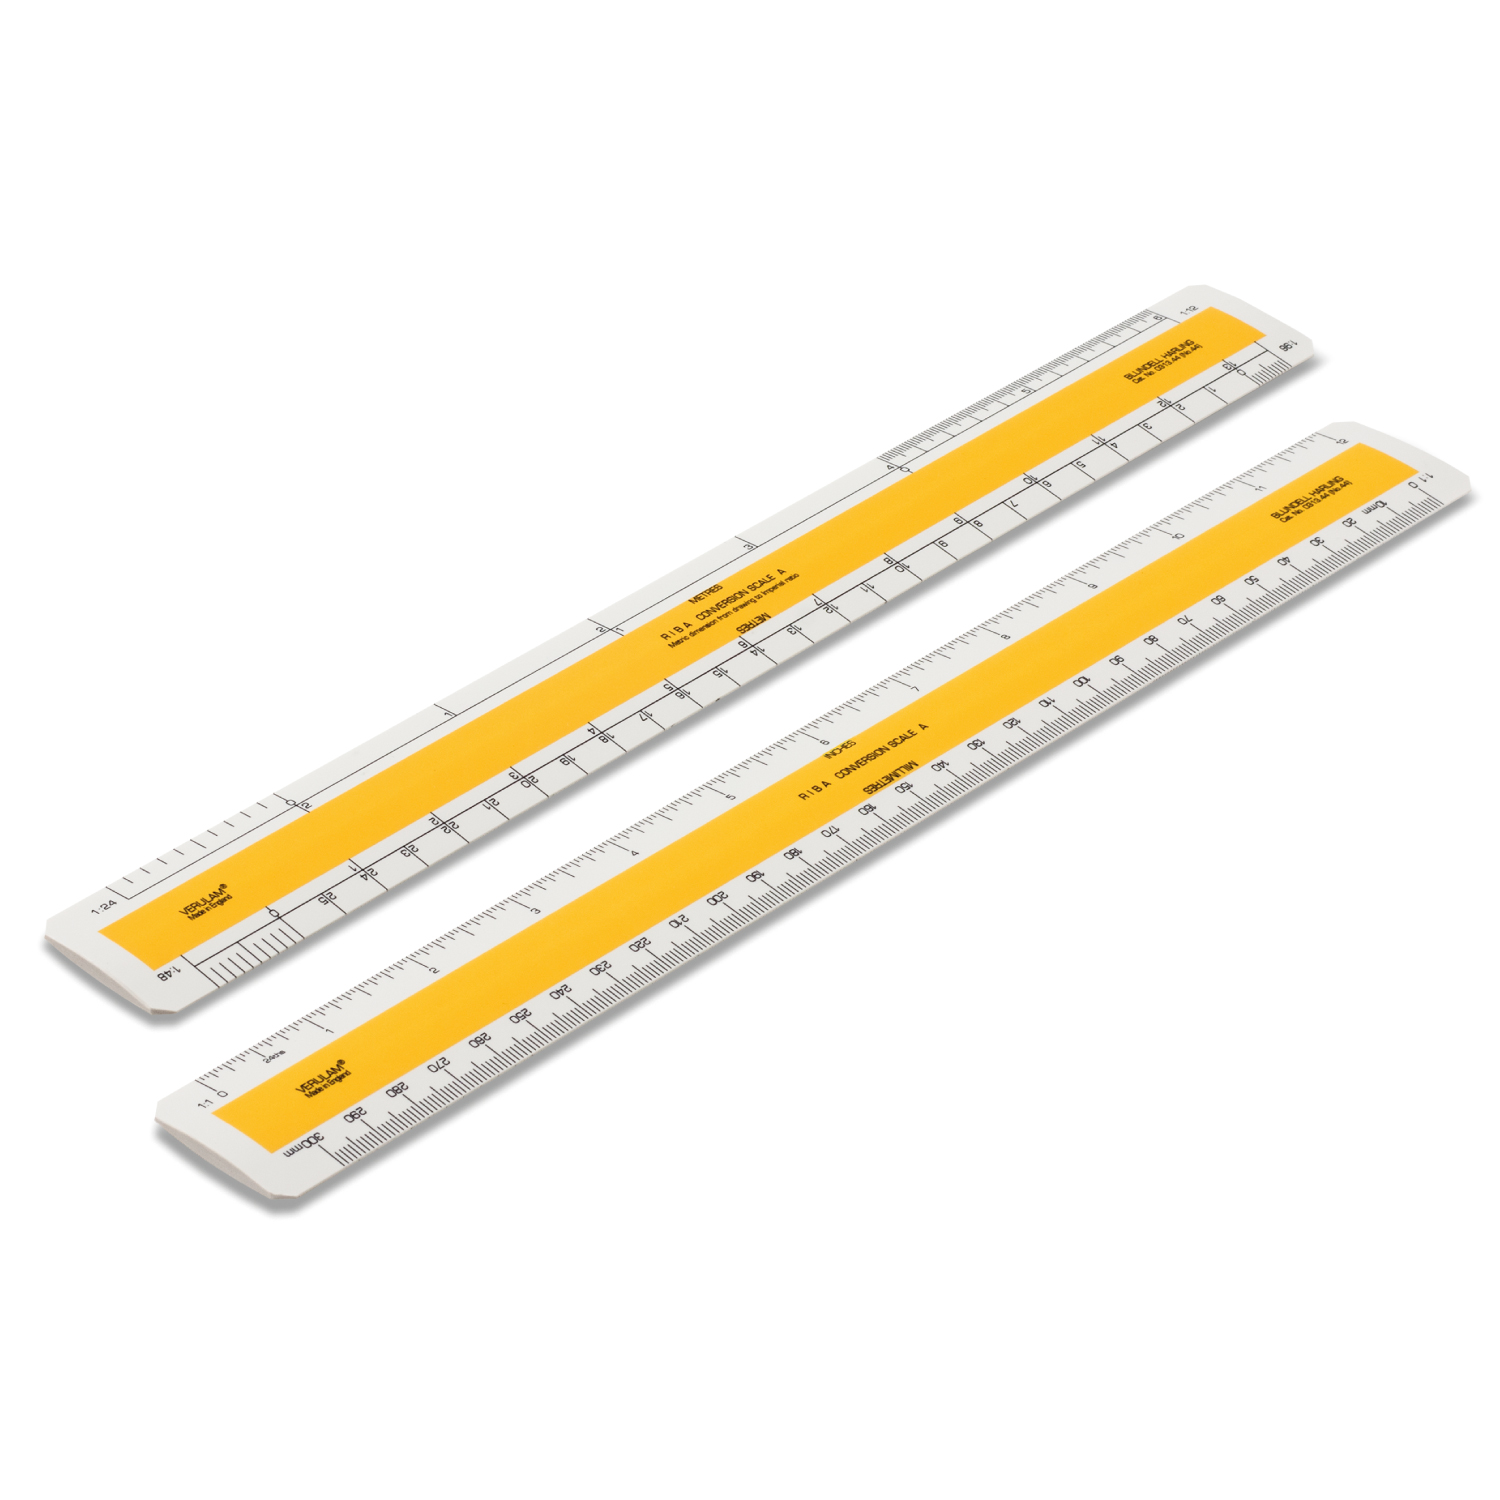 Verulam conversion scale ruler - converts imperial measurements to